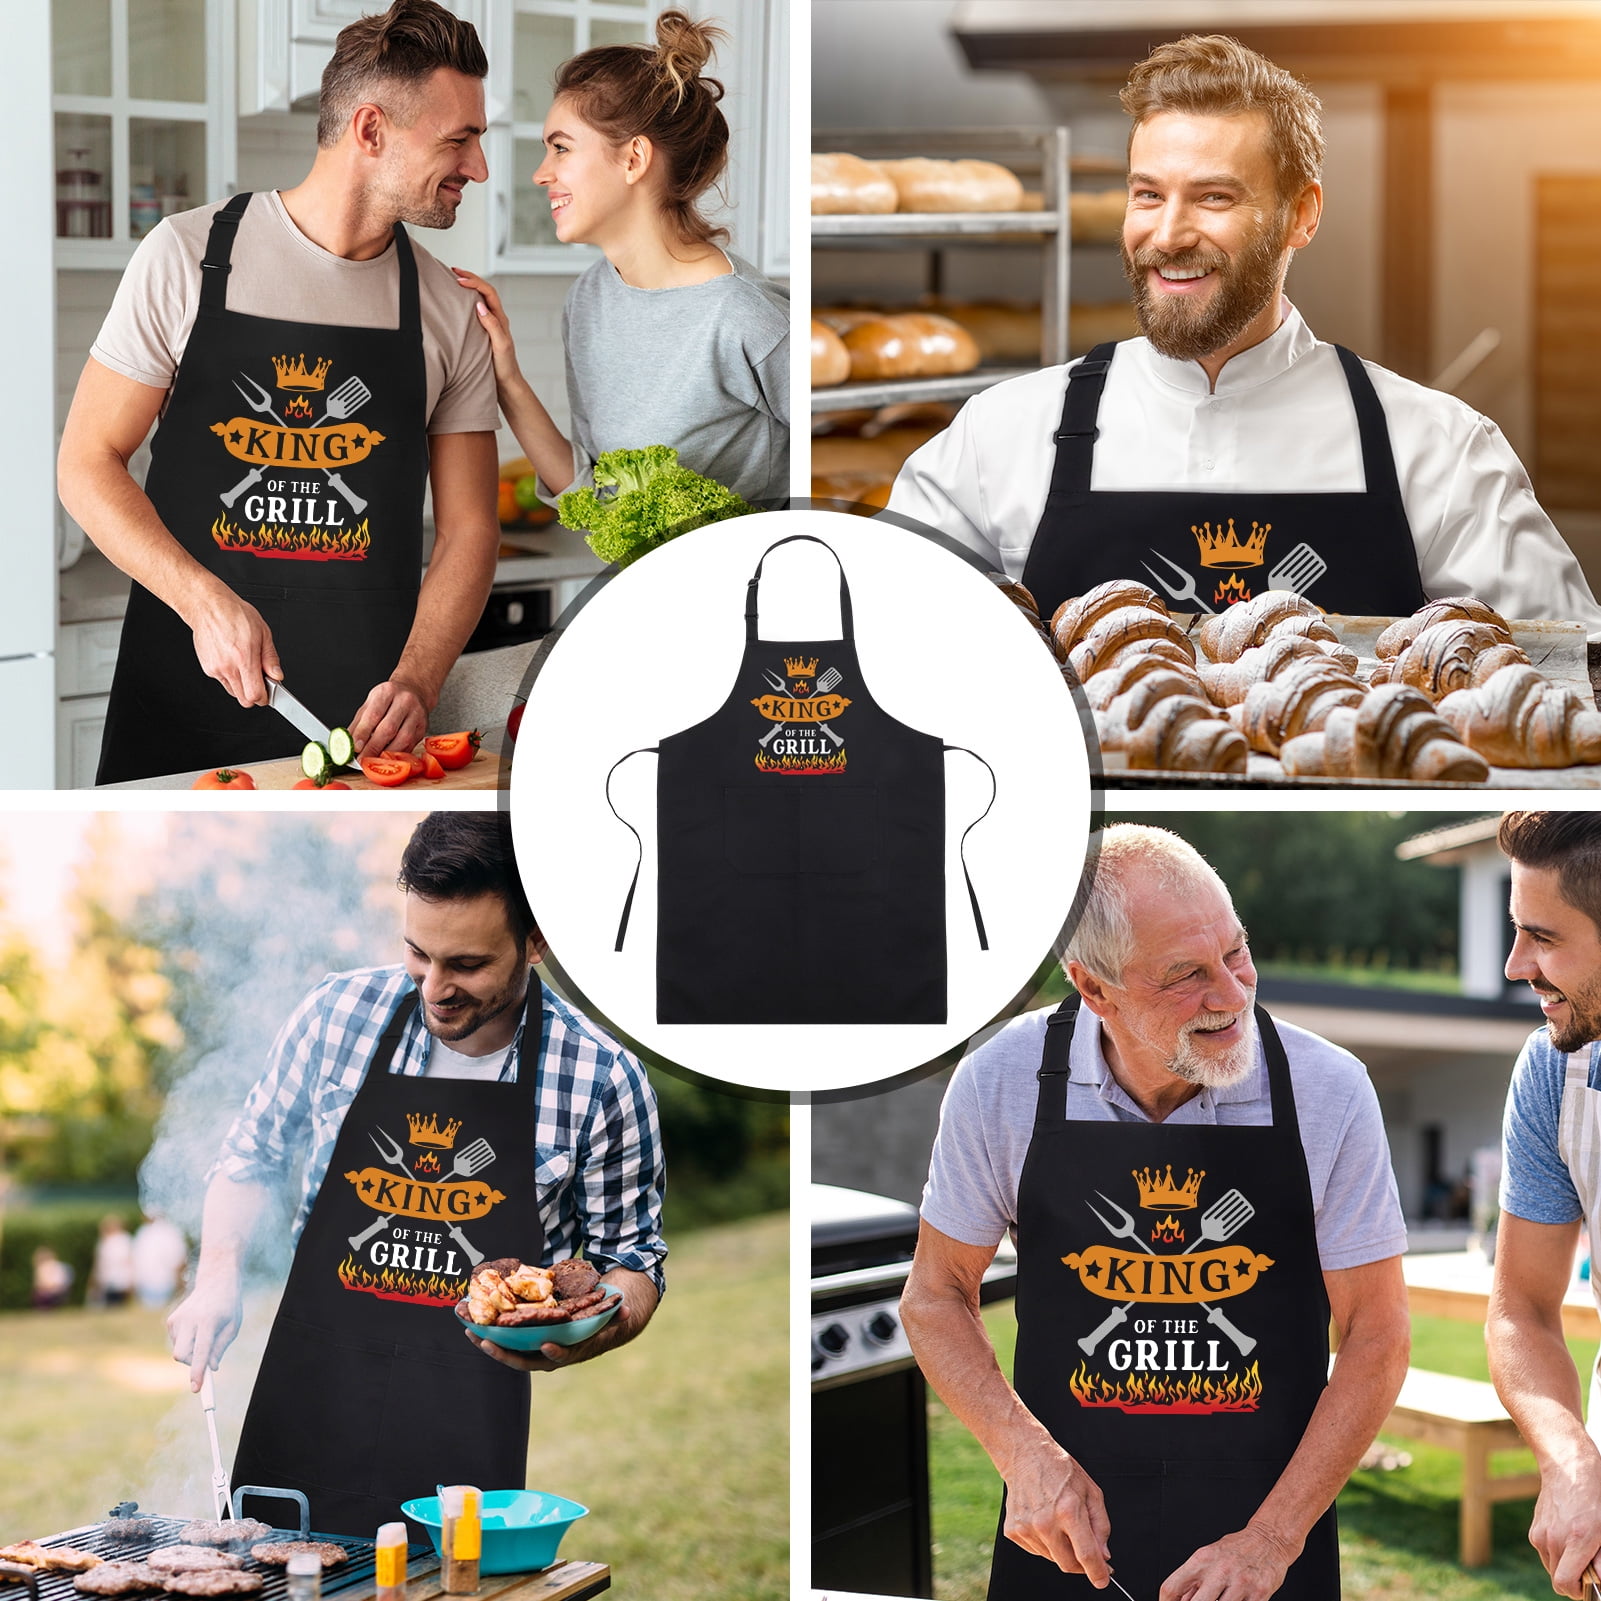 Infankey Funny Apron Cooking Gifts for Men, Apron with 2 Pockets Adjustable  Neck Strap,Waterproof,Gifts for Dad,Husband Gifts